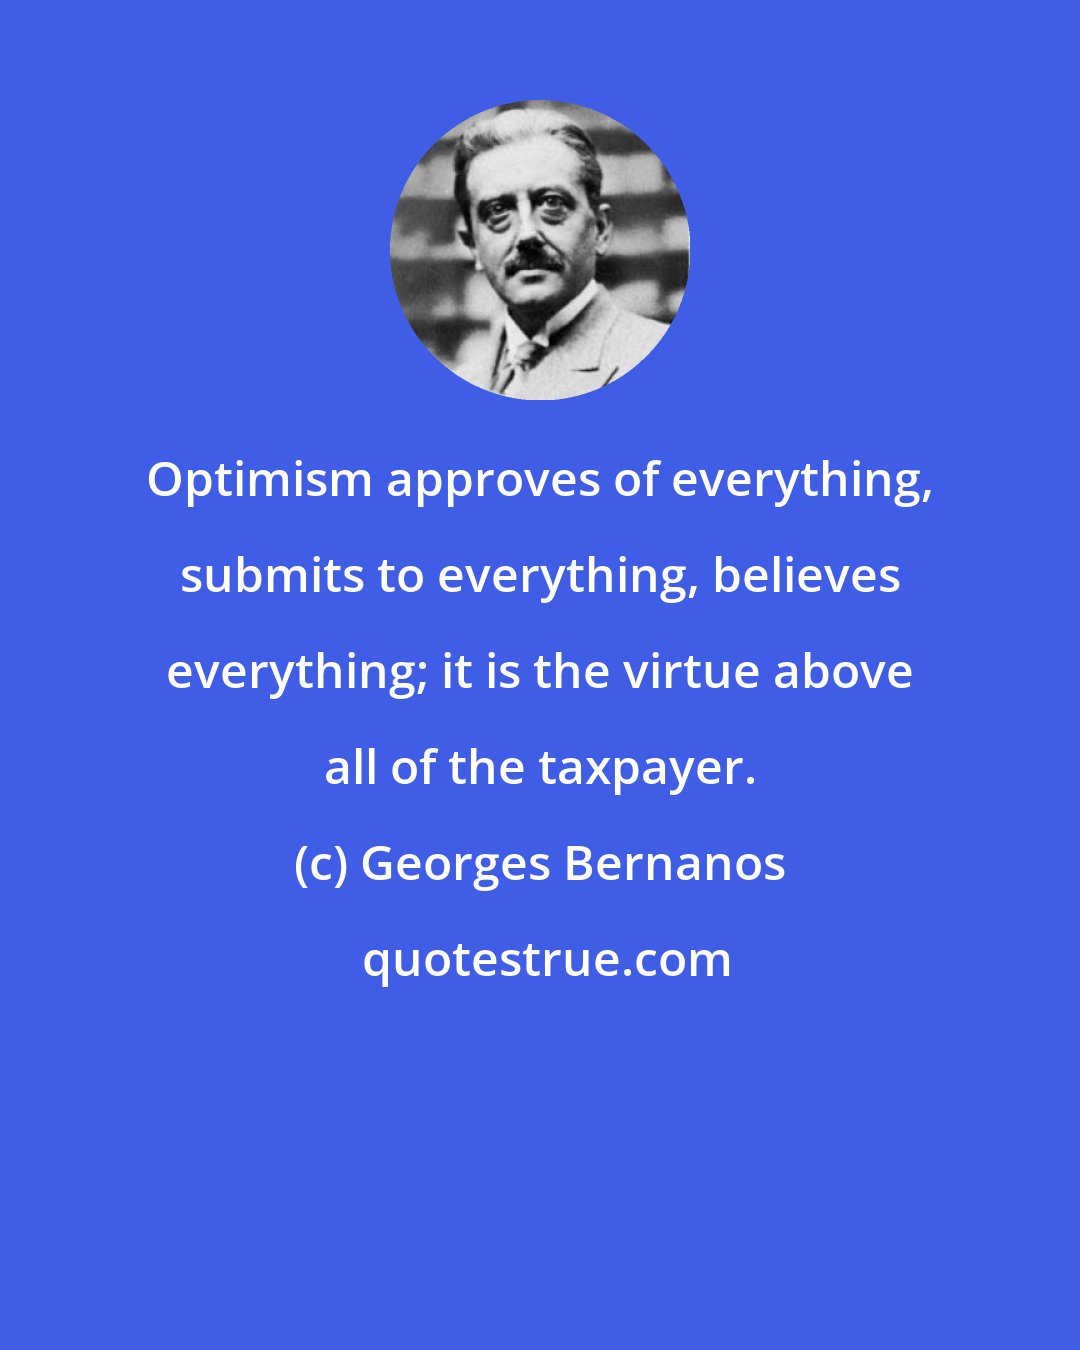 Georges Bernanos: Optimism approves of everything, submits to everything, believes everything; it is the virtue above all of the taxpayer.